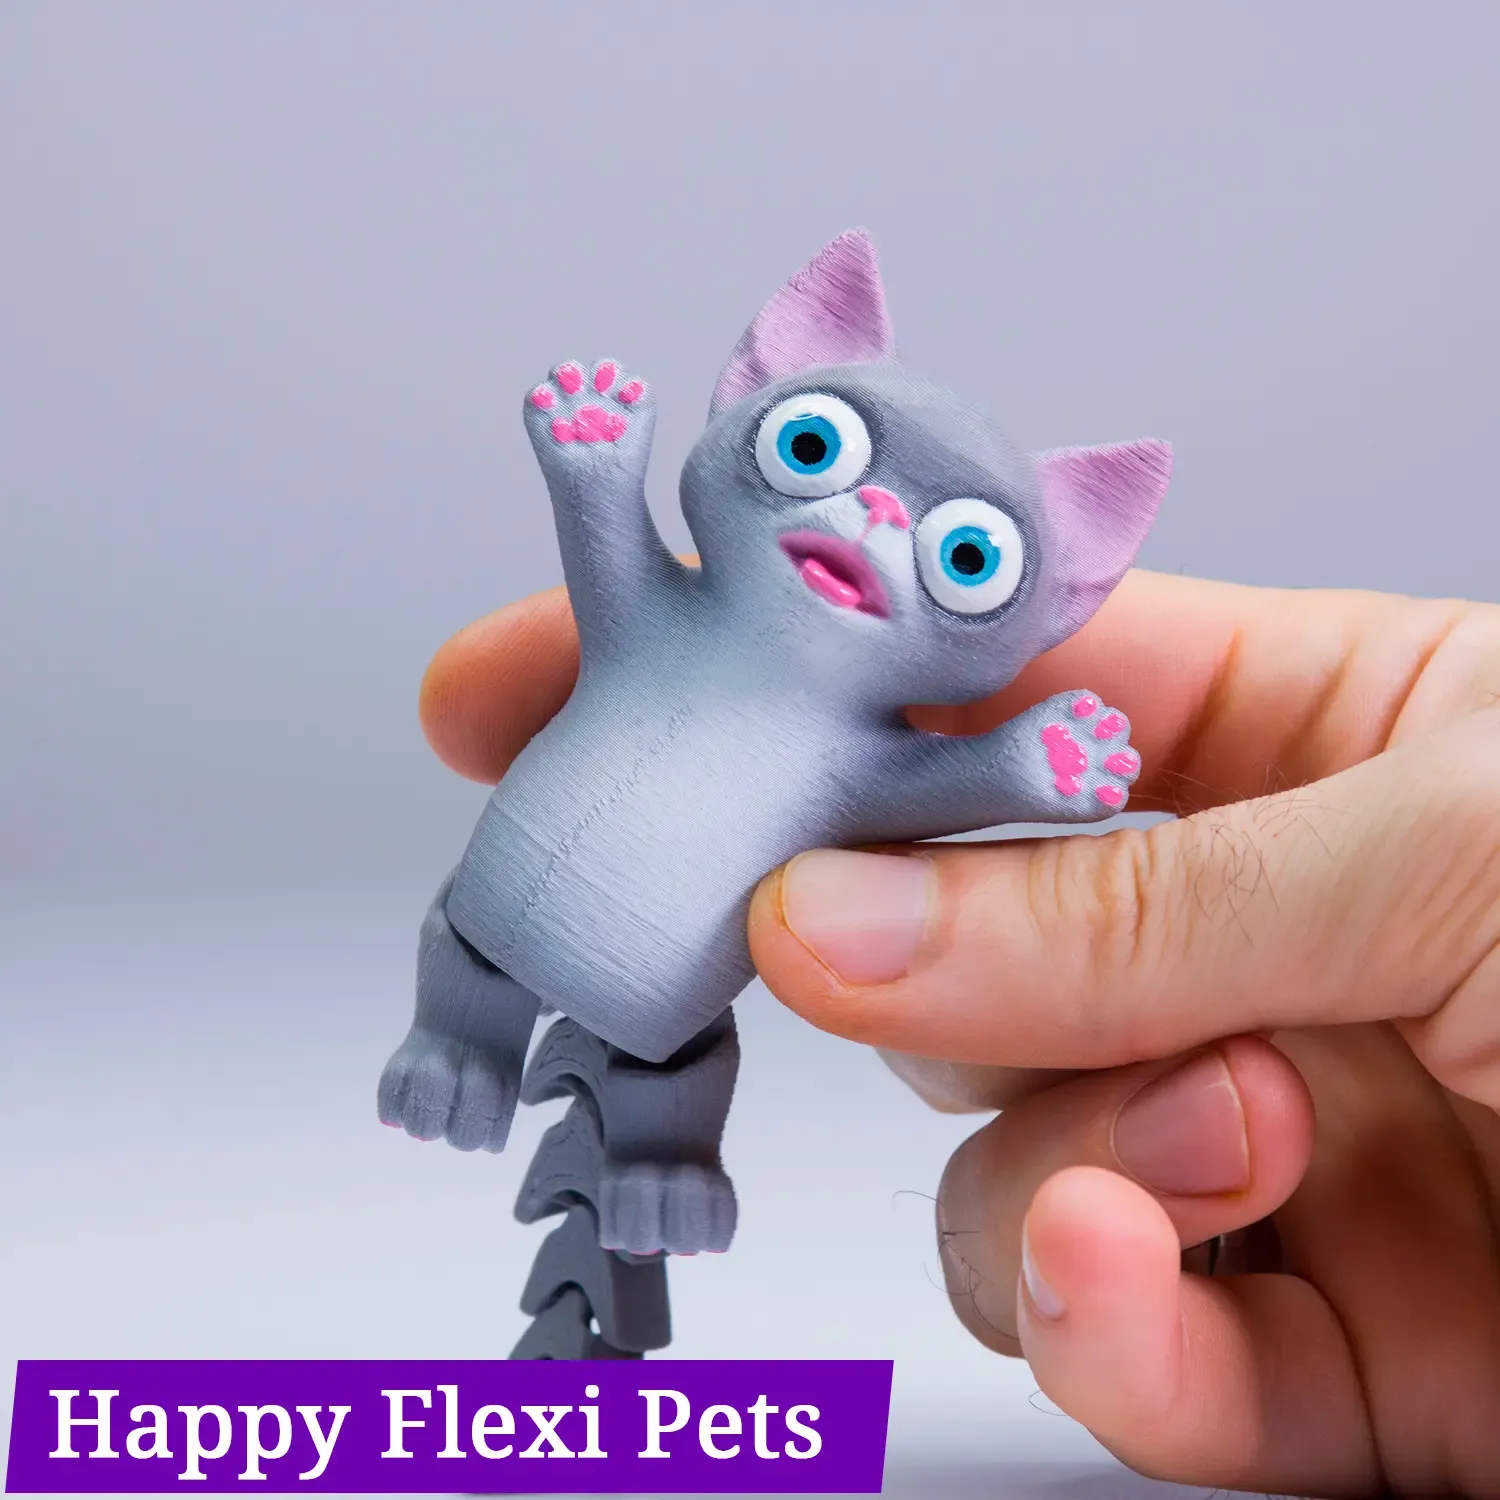 Ghost cat and scared one - print in place flexi pet toys